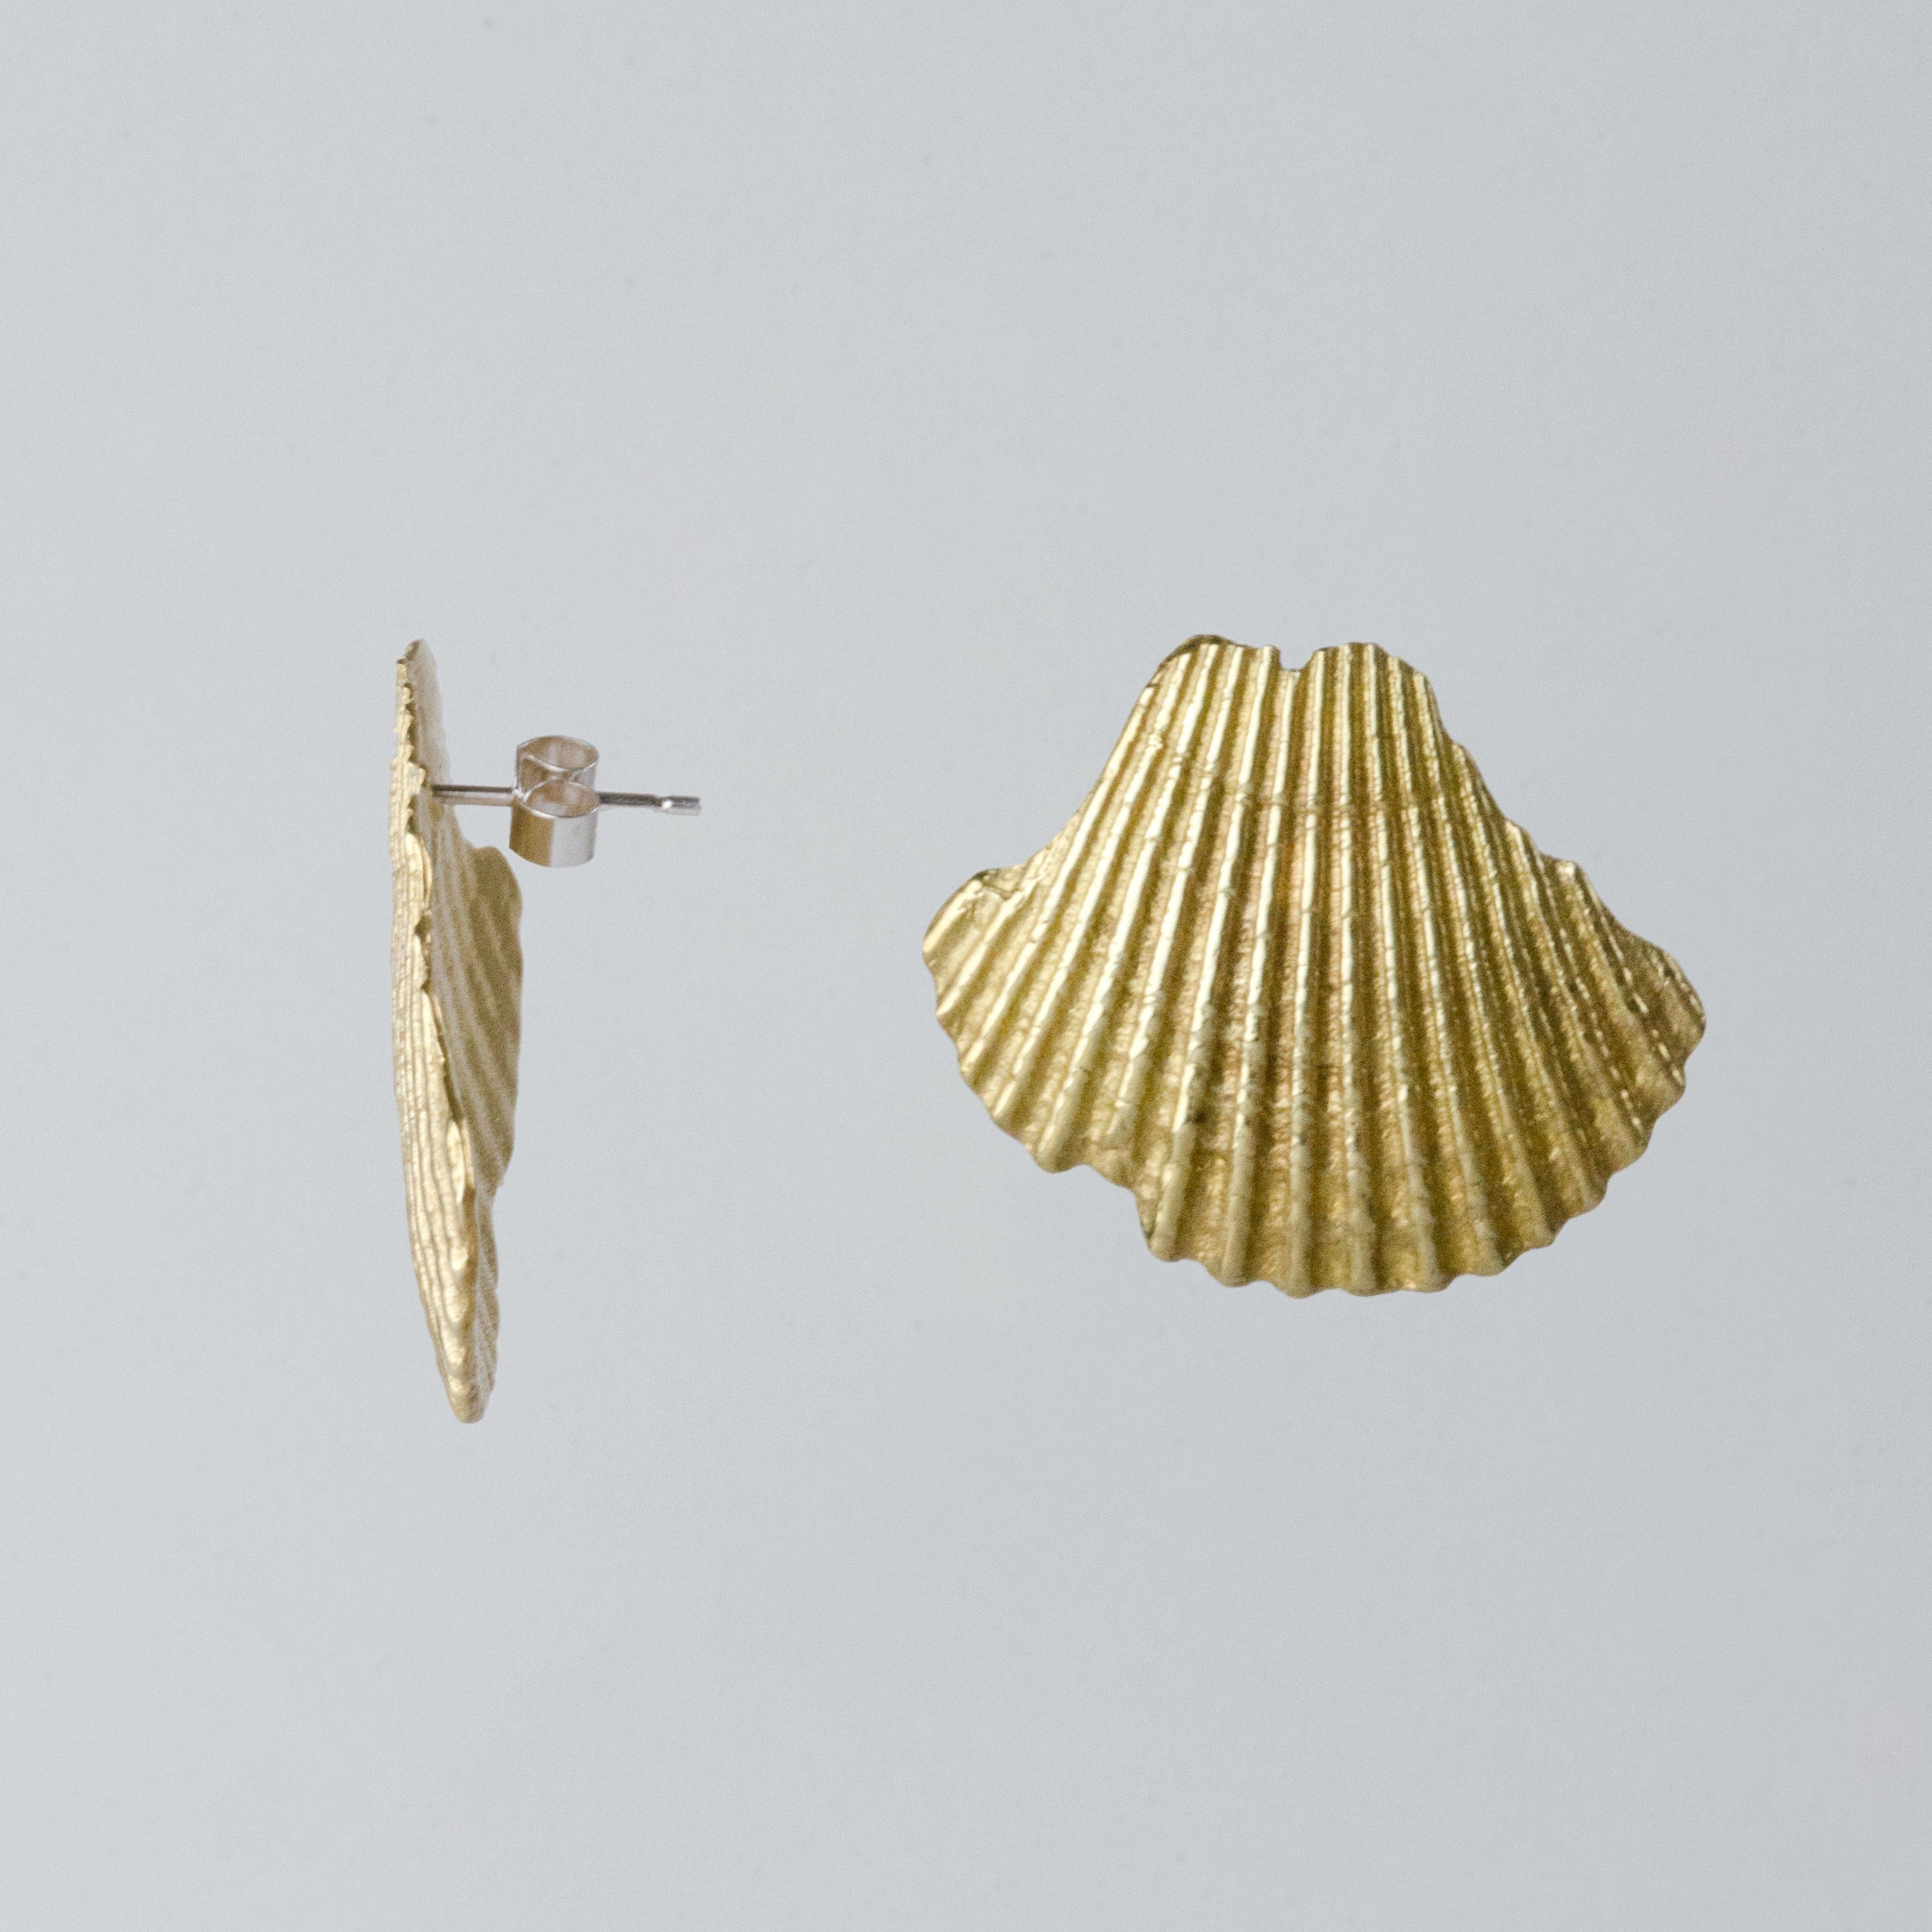 Cast using a real shell foraged from Bournemouth beach, these earrings are a true testament to our beautiful big blue. For those with a deep affinity to the ocean, you can now carry a small slice of it throughout your everyday life and enjoy the magic these earrings bring to not only your outfit, but also your mood.